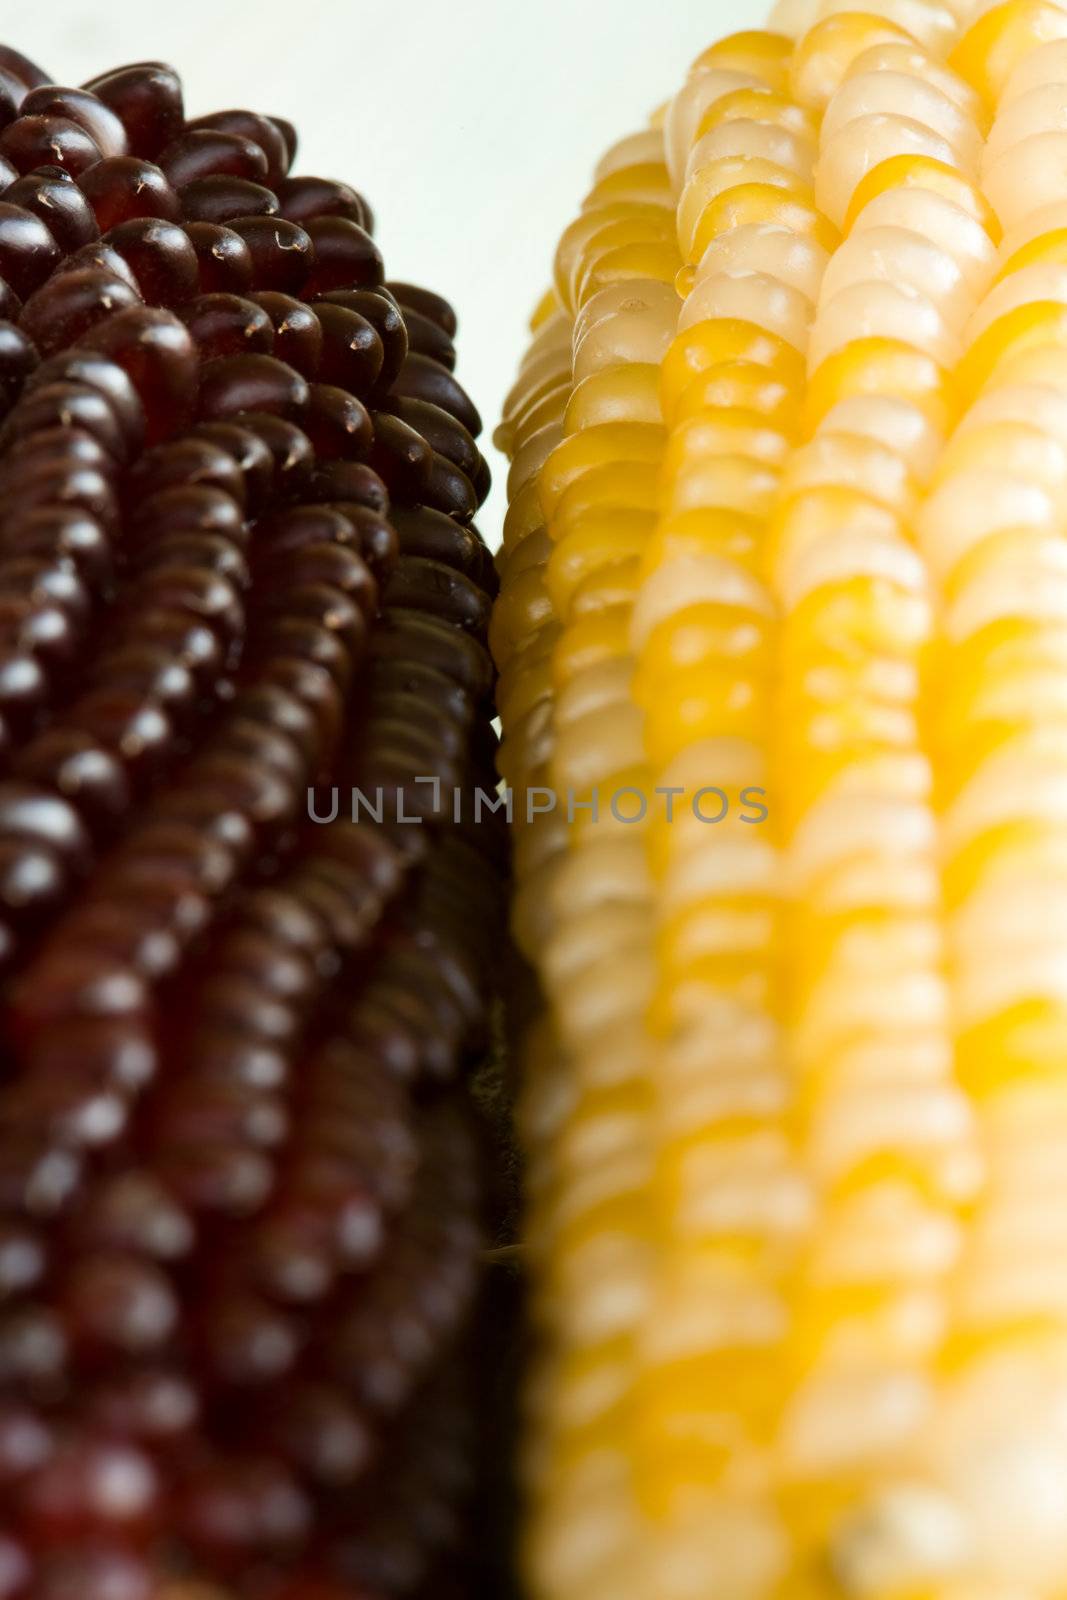 Three corn ears on a table, close-up